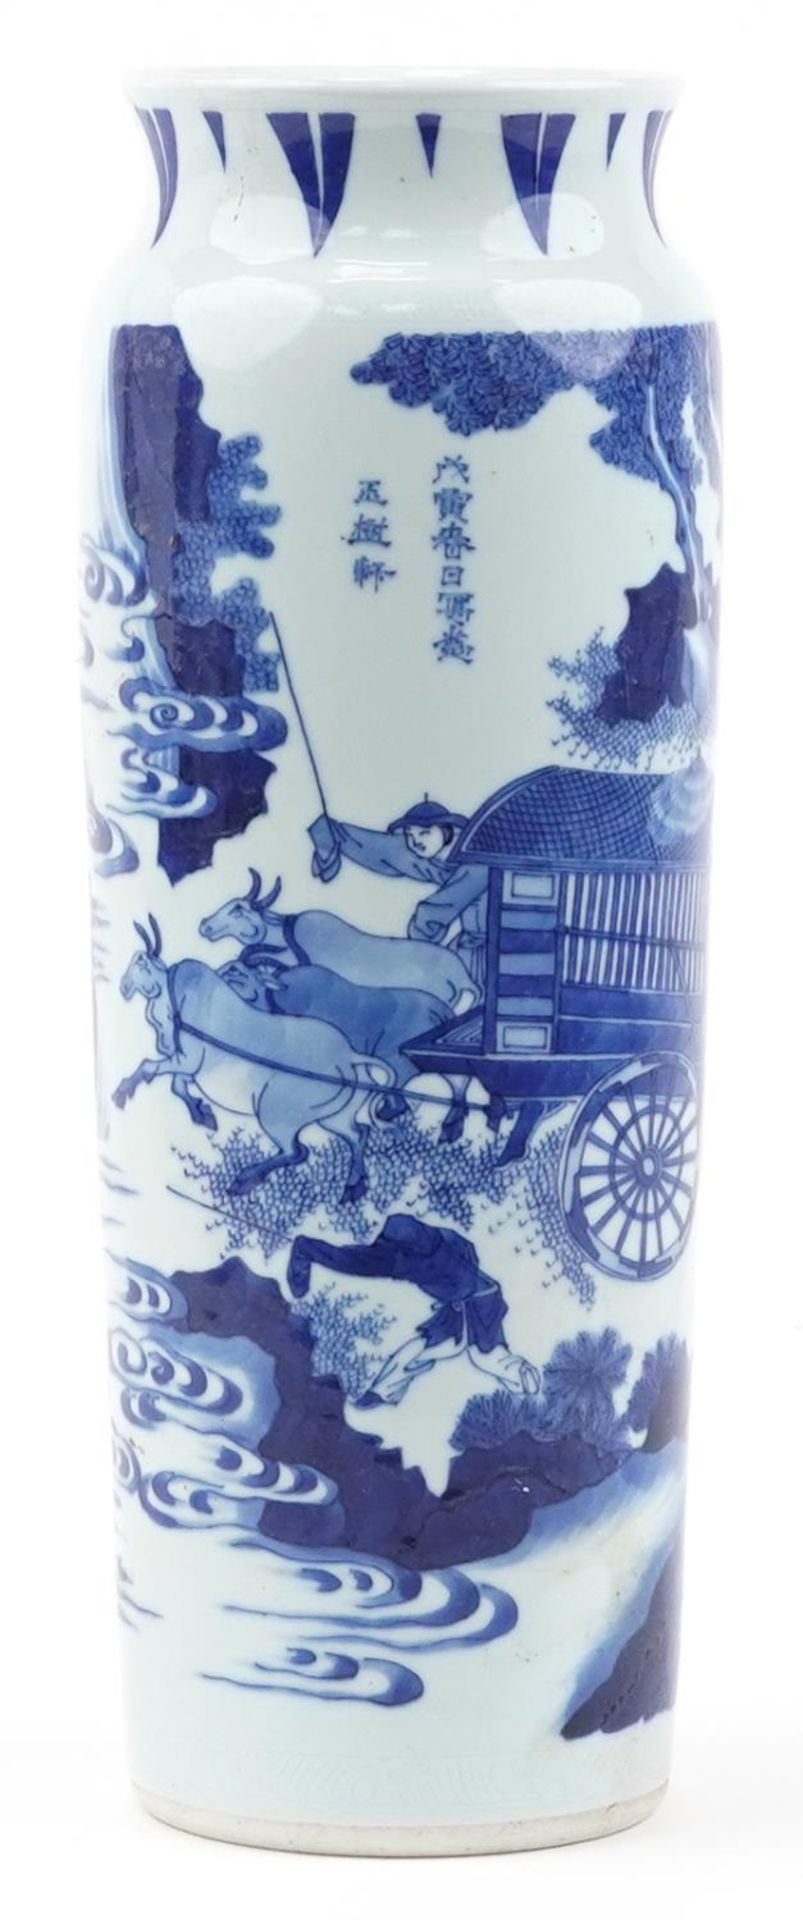 Large Chinese blue and white porcelain sleeve vase hand painted with rickshaw and figures in a